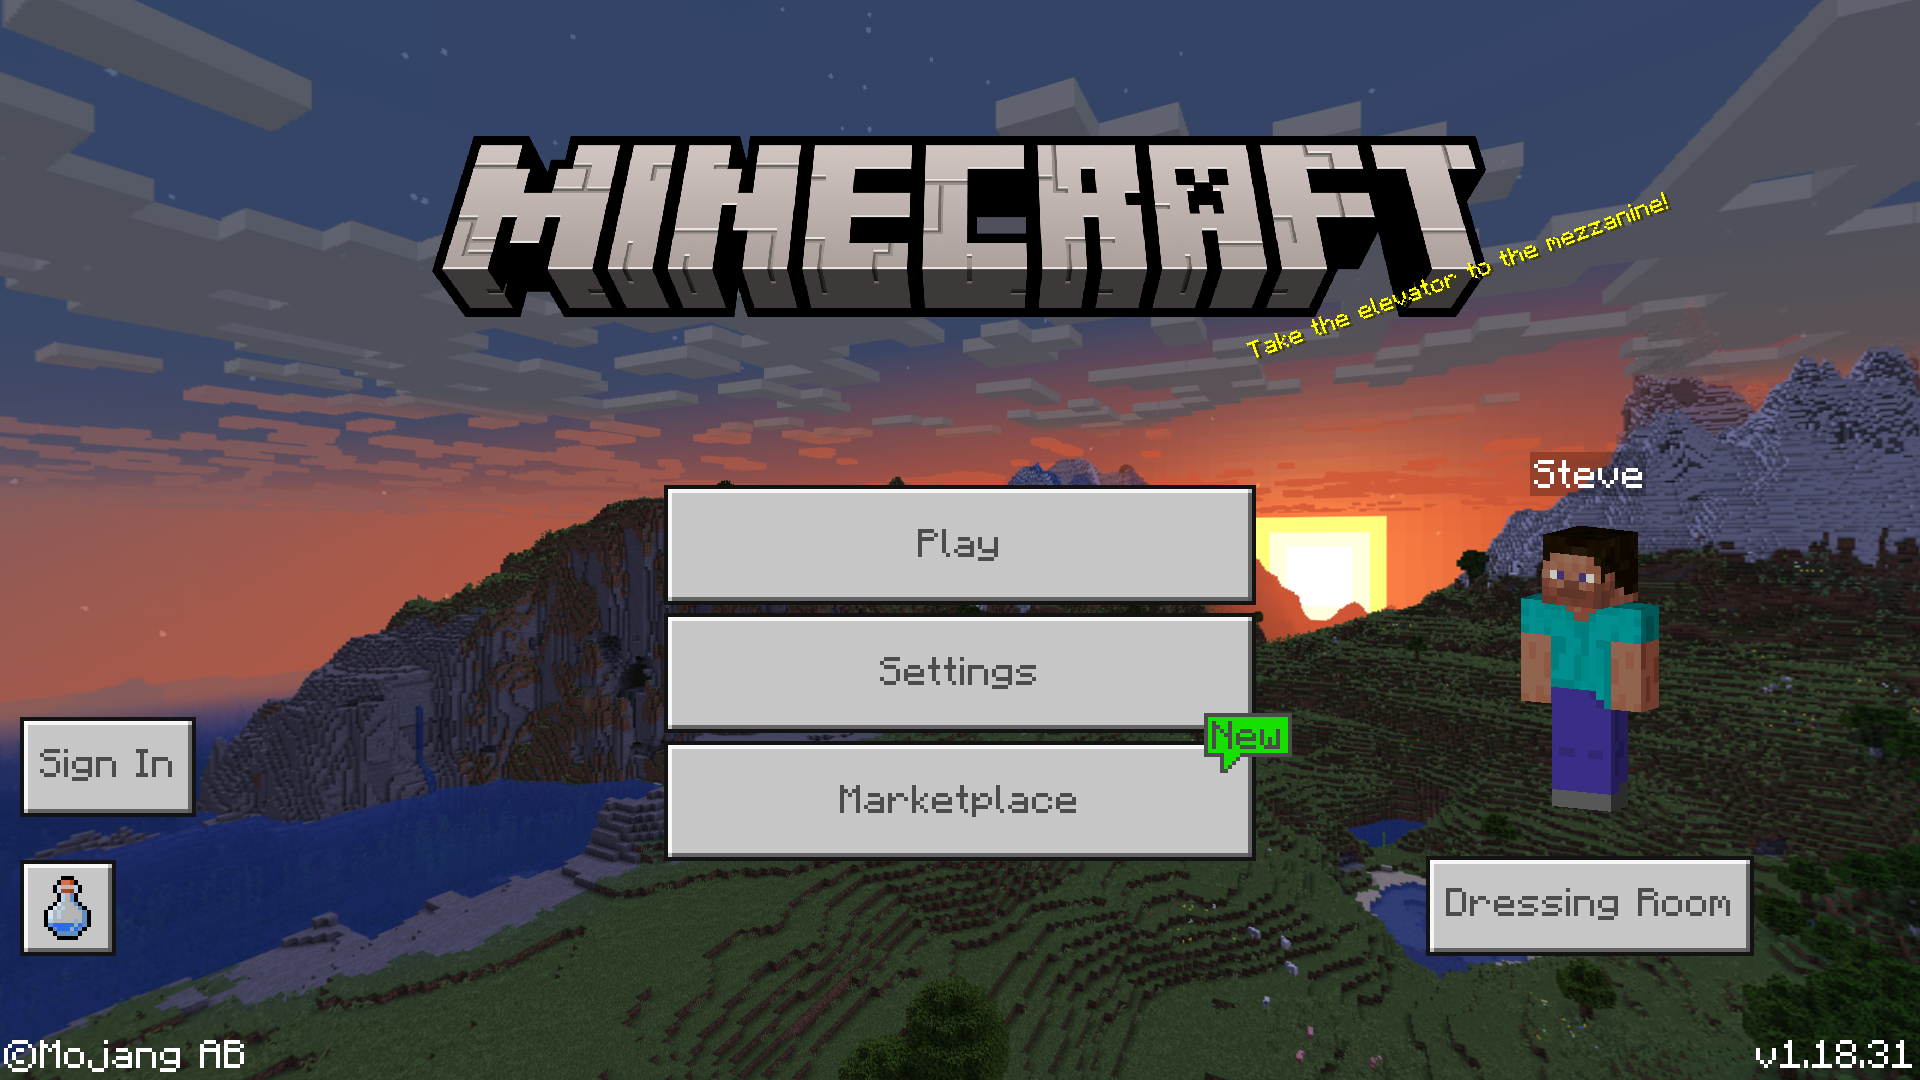 Download Minecraft PE 1.18.30.28 for Android